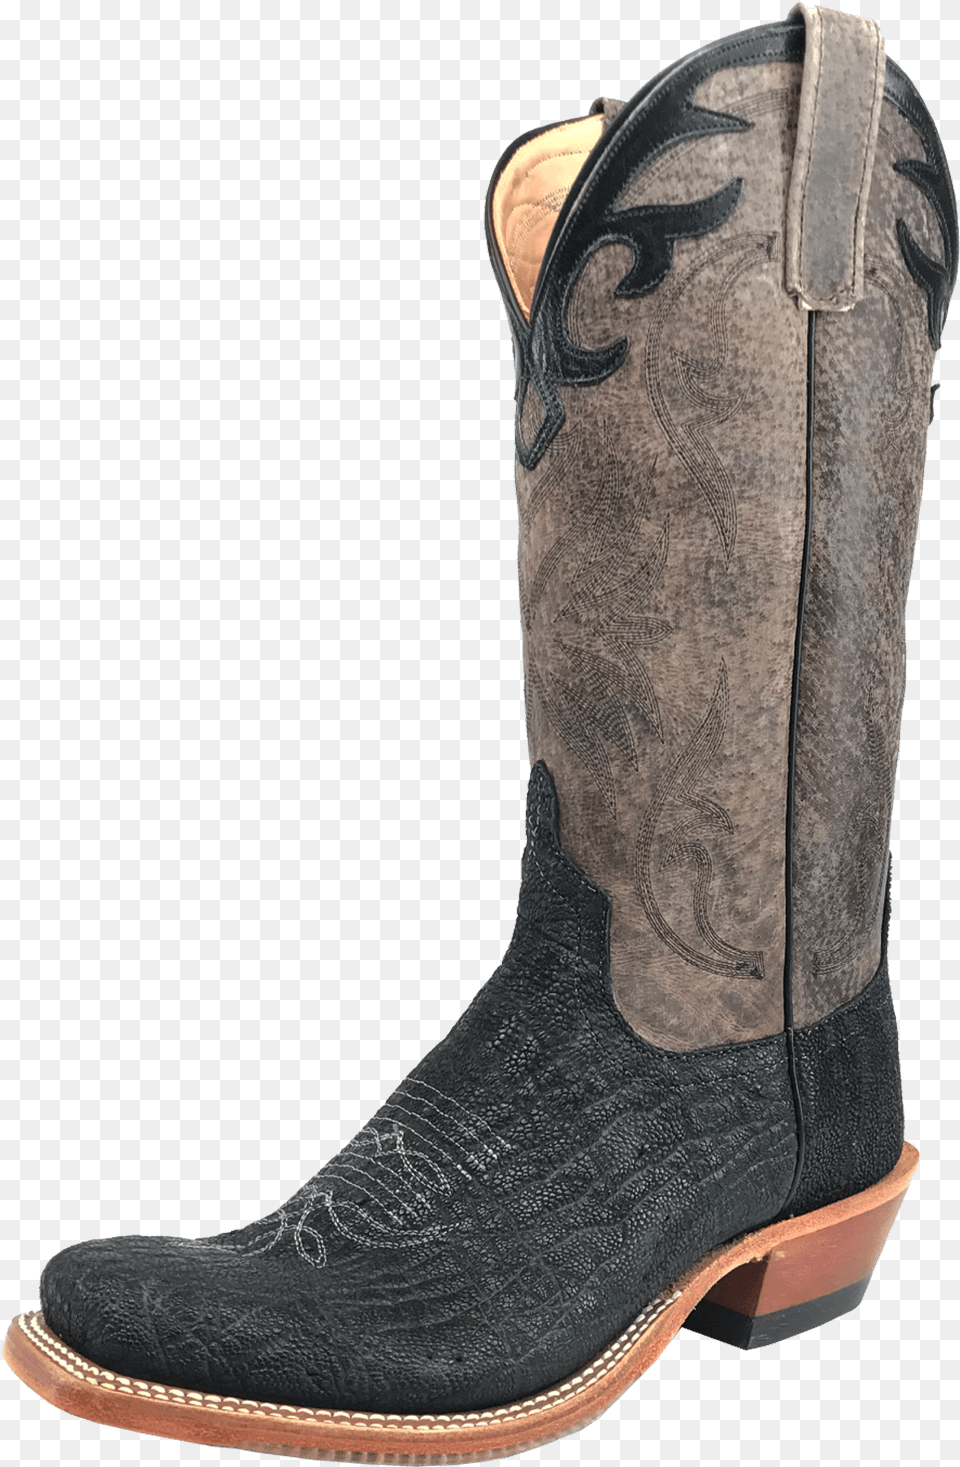 Anderson Bean Men S Anderson Bean Grey Elephant Boots, Boot, Clothing, Footwear, Shoe Png